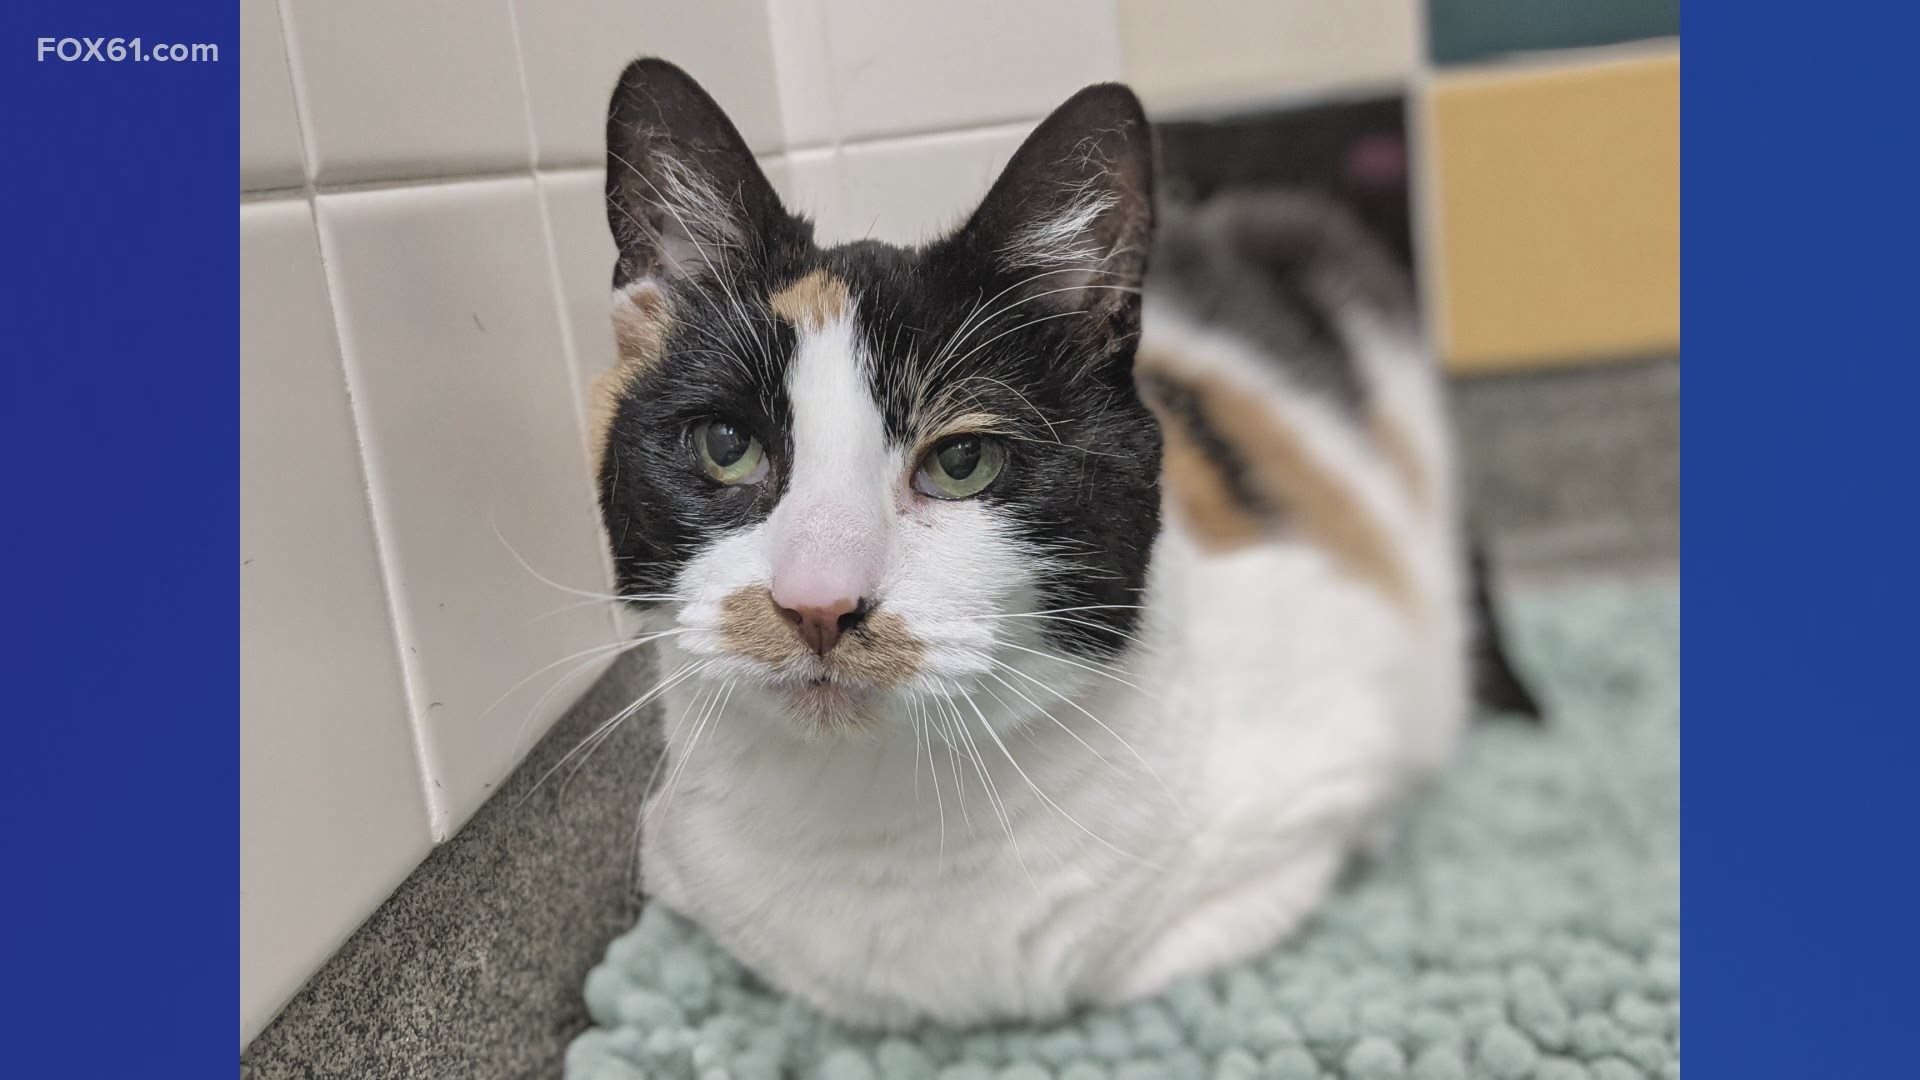 Meet Calico! This 7-year-old cat is looking for her forever home.